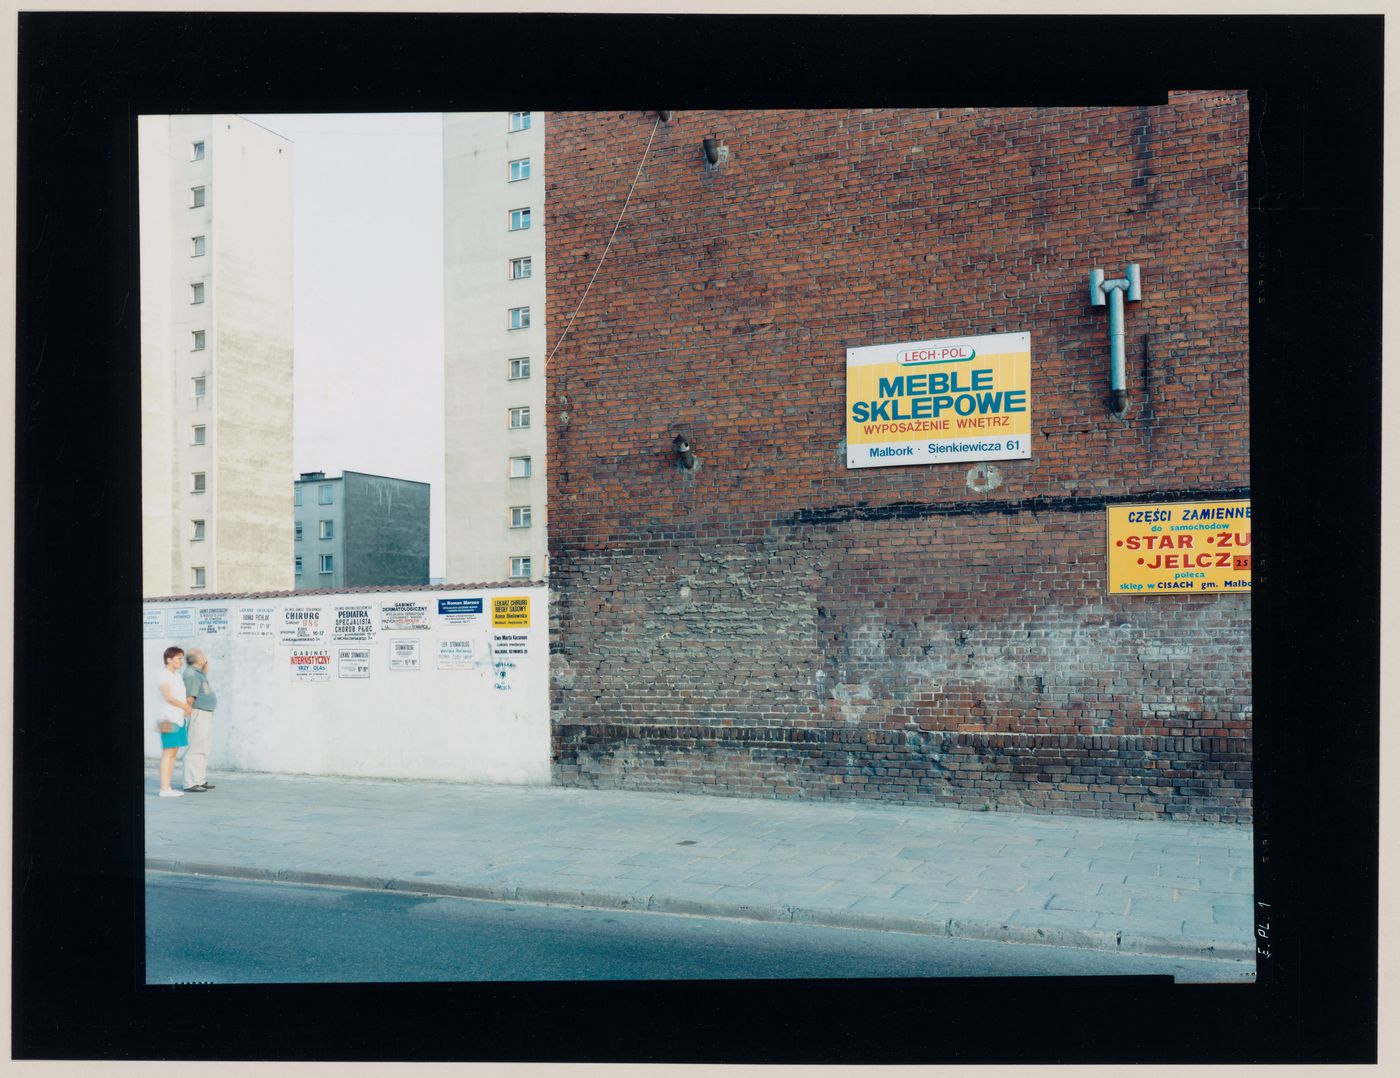 View of walls bearing advertising signs and signs offering medical services showing apartment houses in the background, Malbork, Poland (from the series "In between cities")